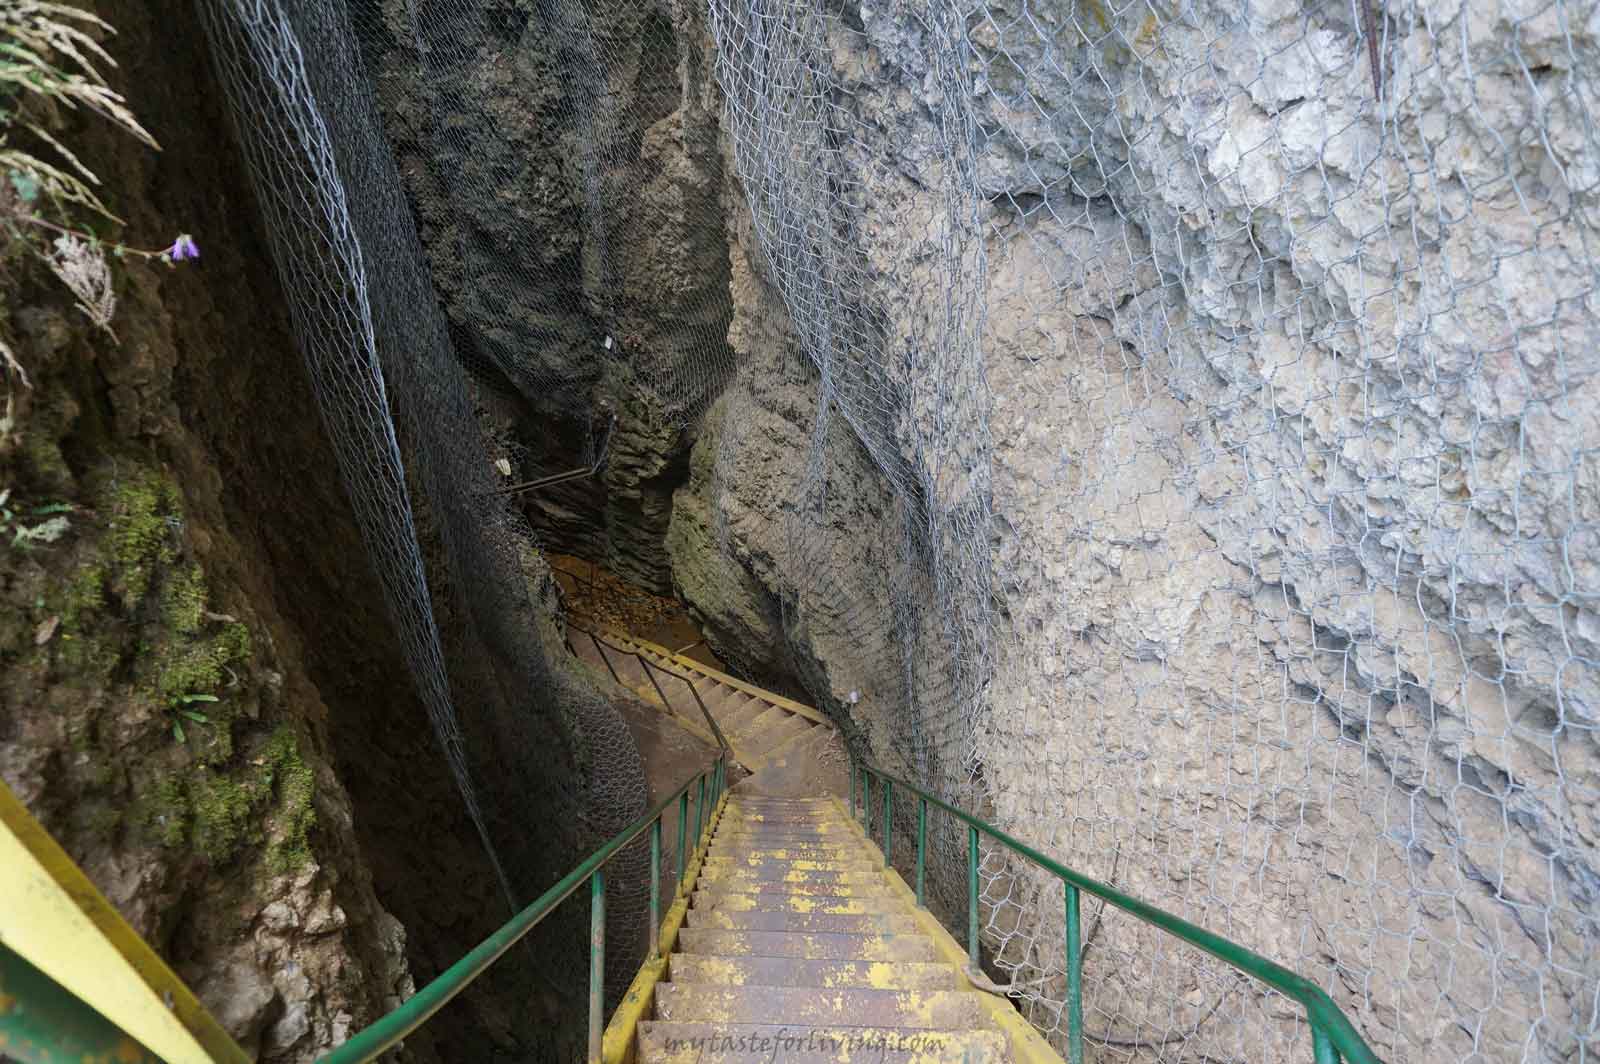 Big Garvanitsa cave is located between the villages of Gorsko Slivovo and Karpachevo, Lovech district, Bulgaria. It is a vertical cave with a depth of over 60 meters and a length of 275 meters.